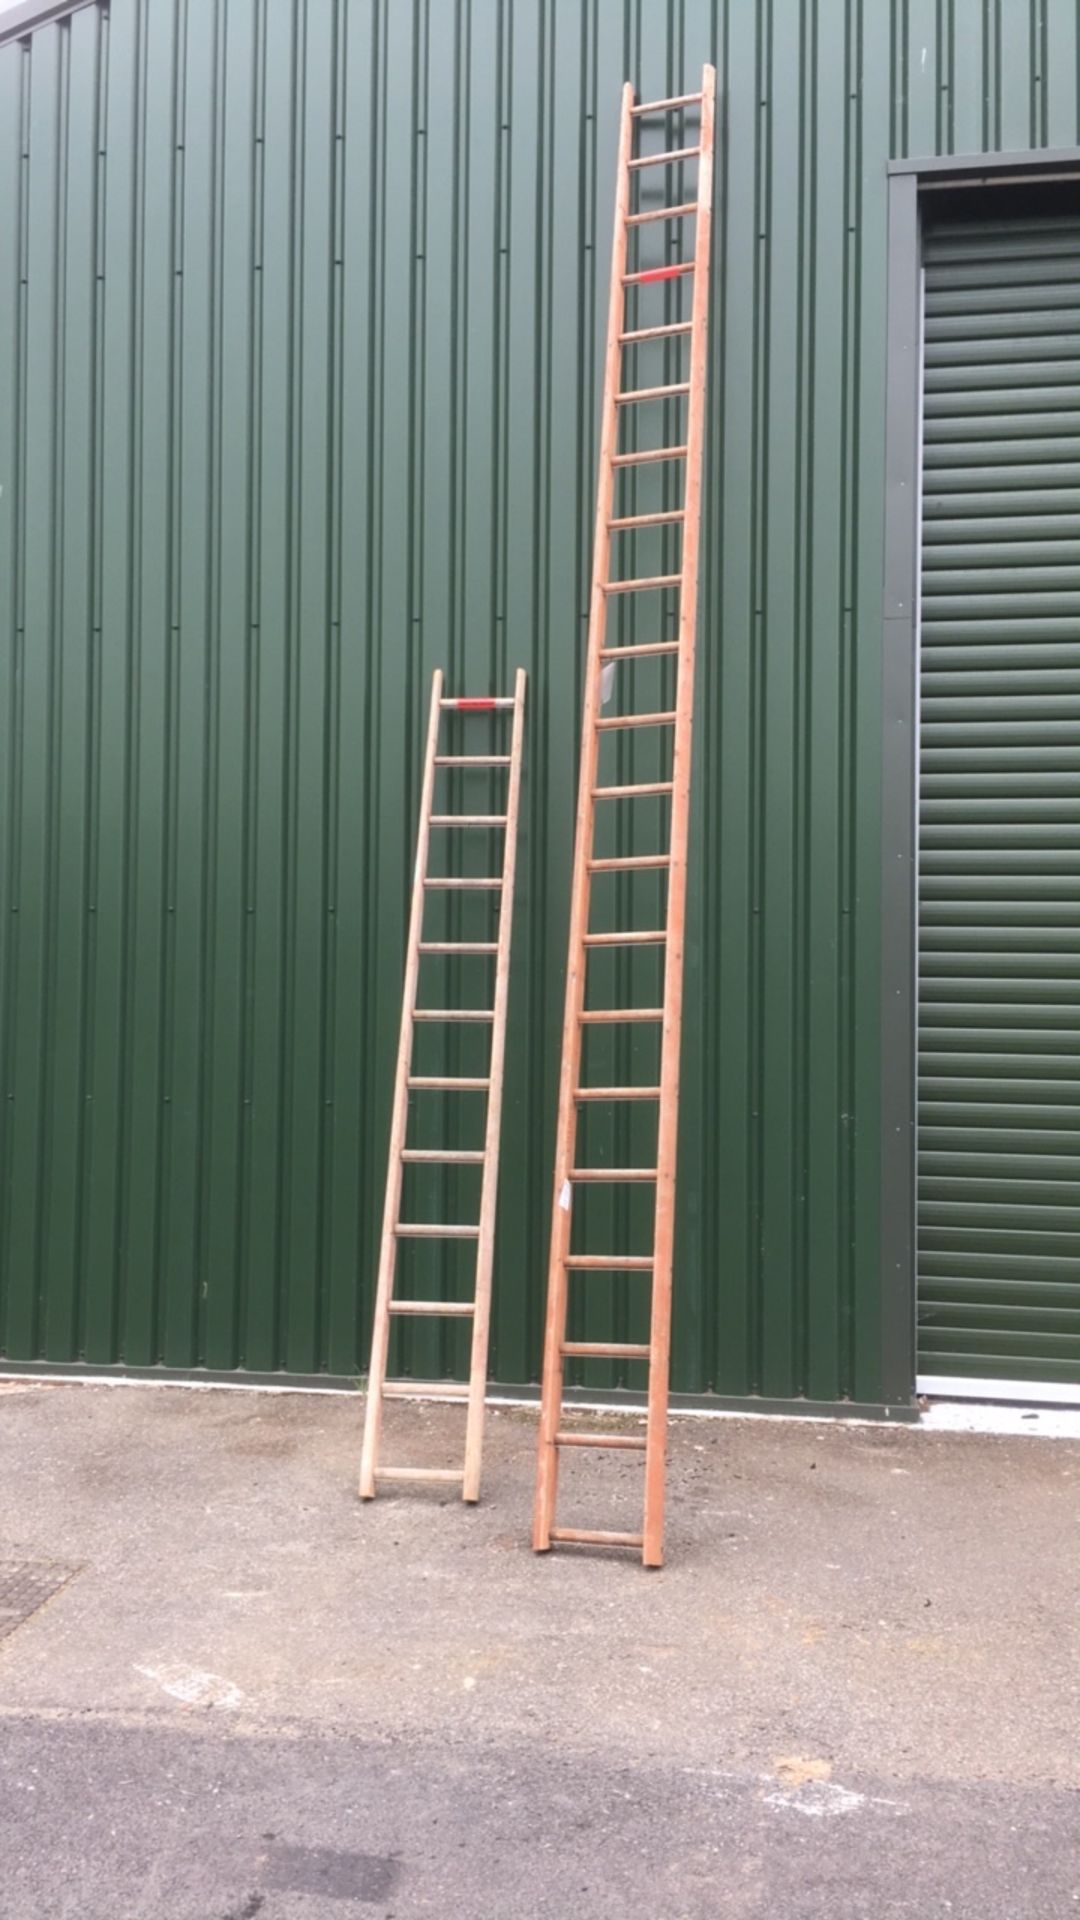 Wooden ladders (A713503) & (A1110347)